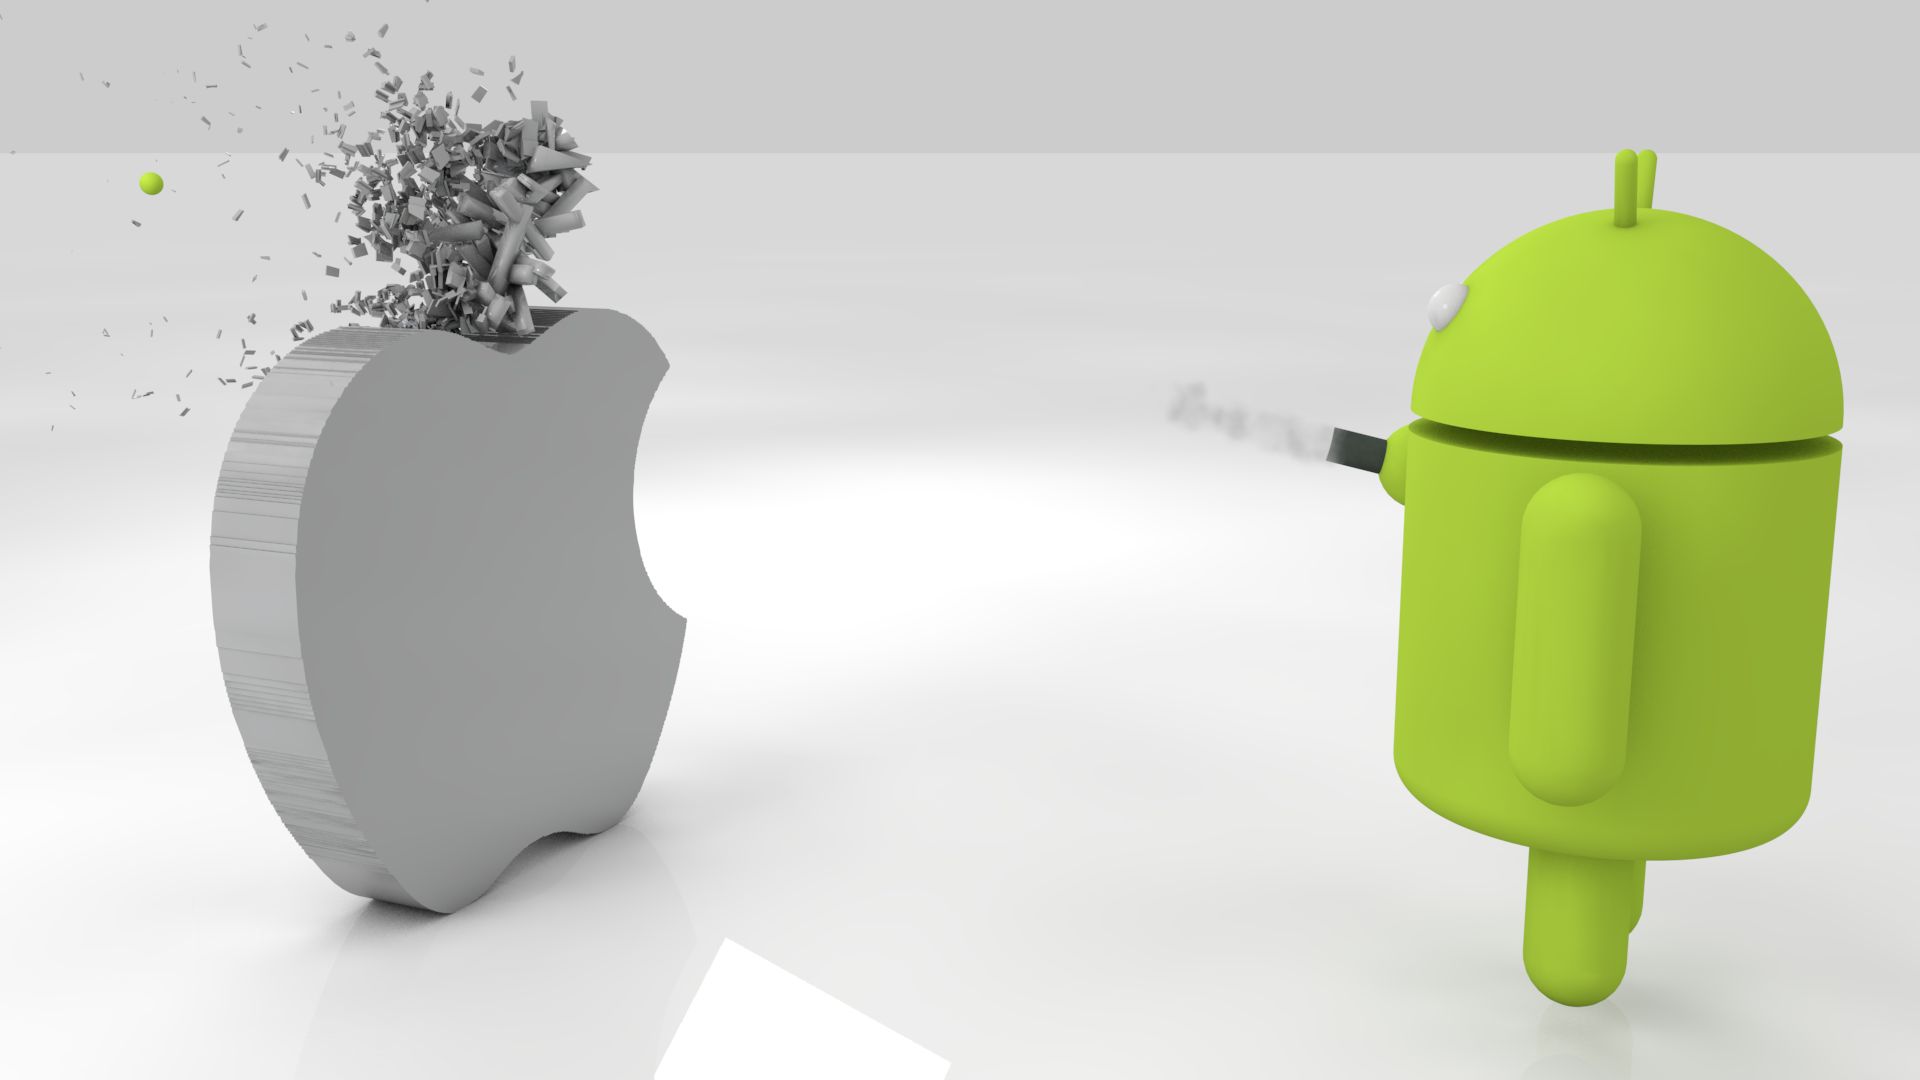 Apple Vs Android Wallpaper Awesome Pictures 14b652m2 Yoanu